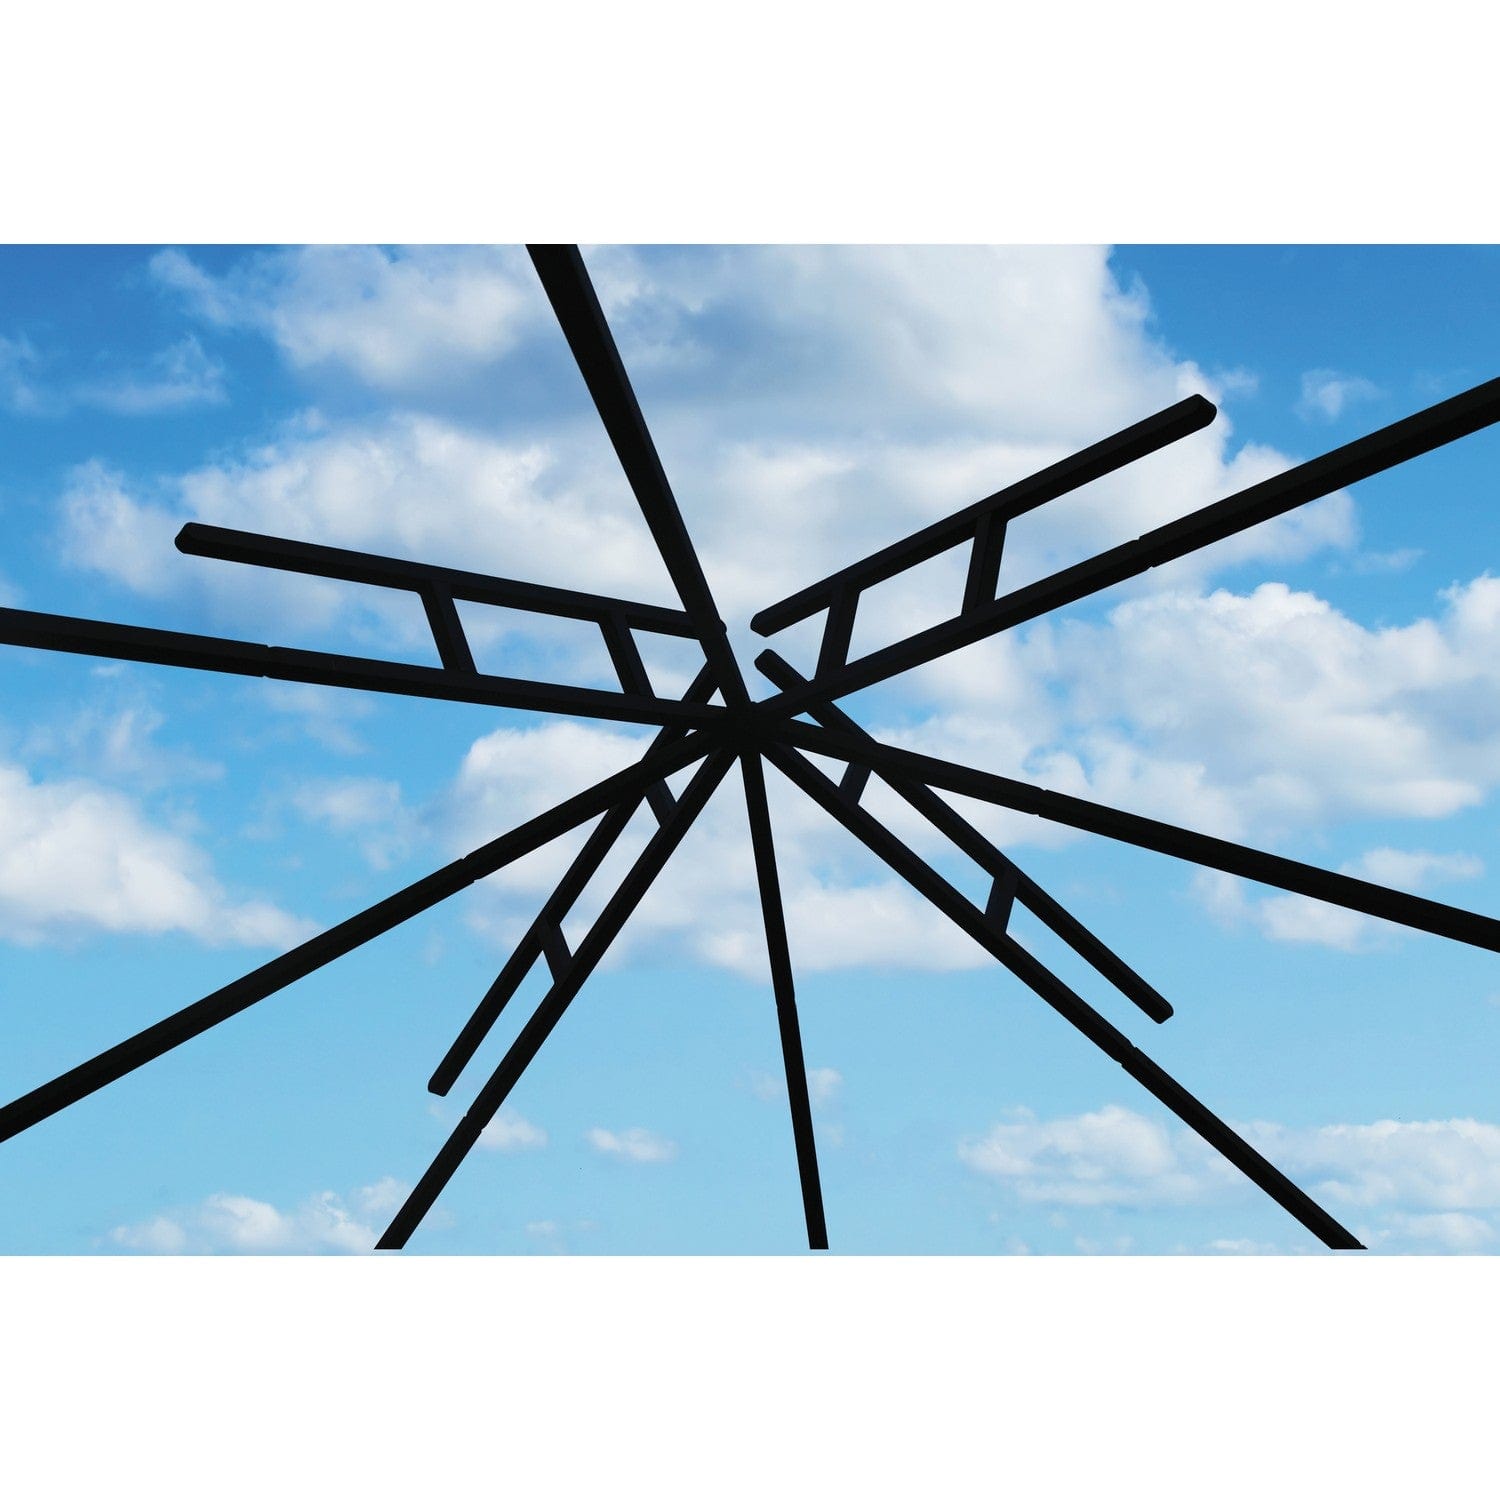 Riverstone Industries Soft Top Gazebos Riverstone | ACACIA Gazebo Roof Framing and Mounting Kit With OutDURA Canopy - Kona